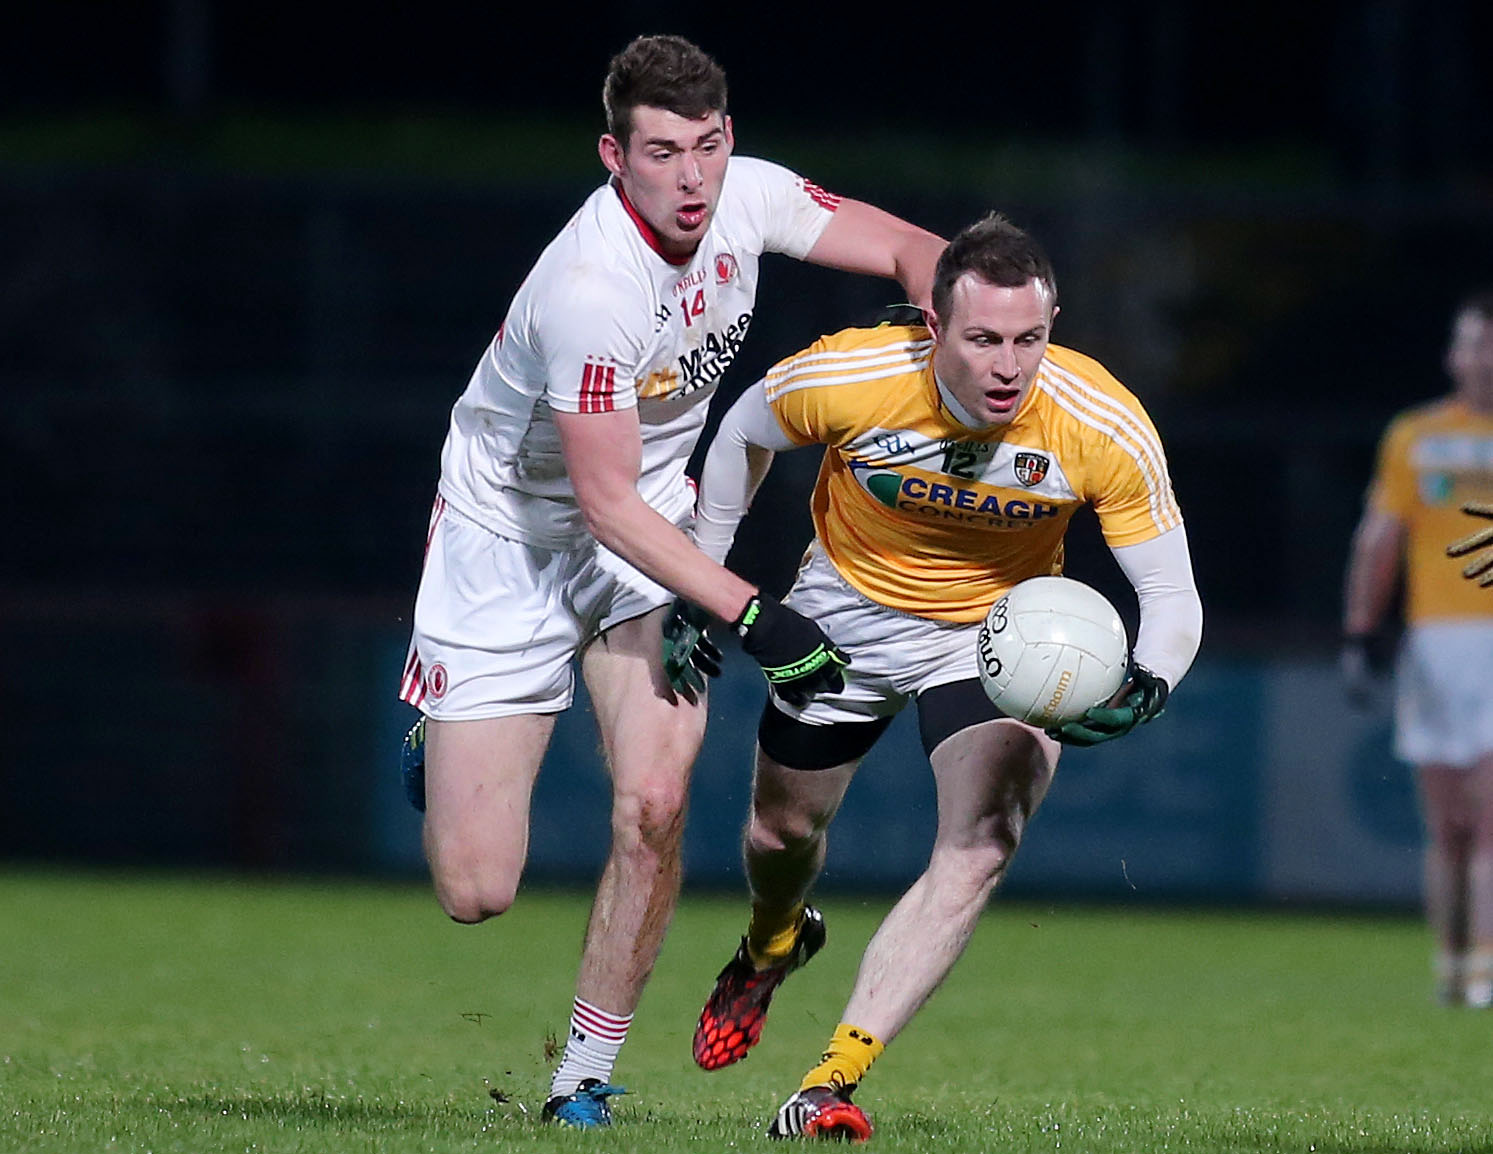 Antrim midfielder Michael McCann has emerged as a major doubt for Sunday’s NFL clash with Leitrim after picking up a hamstring injury while playing for Cargin at the weekend. 